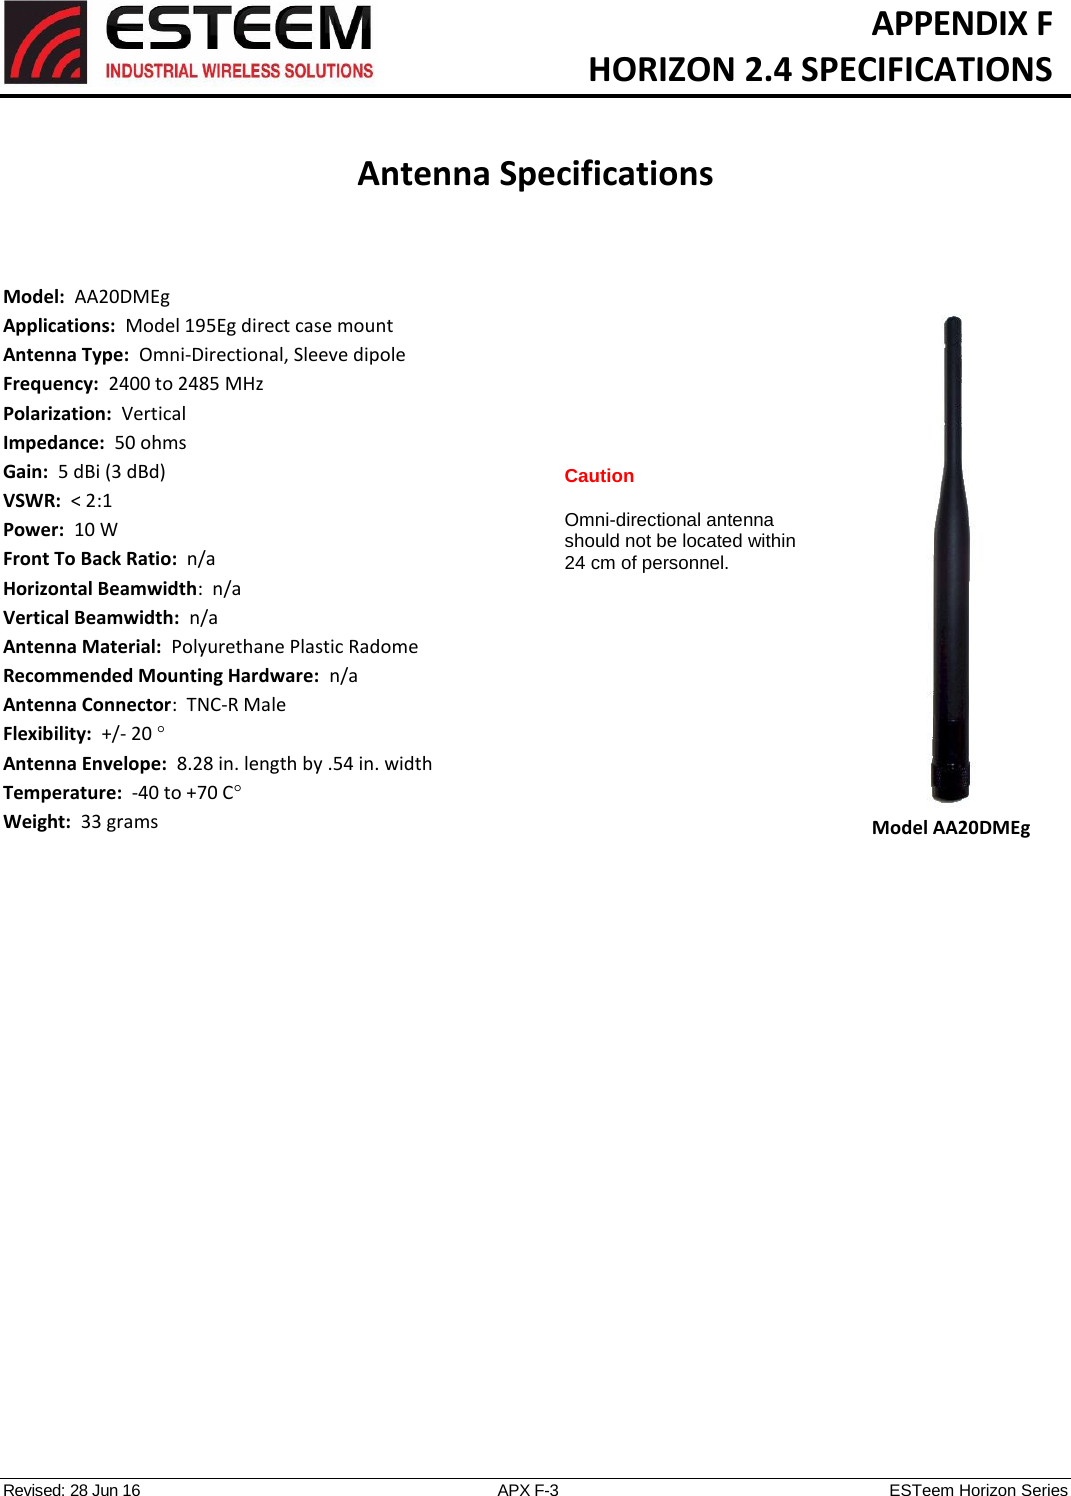   APPENDIX F   HORIZON 2.4 SPECIFICATIONS   Antenna Specifications   Revised: 28 Jun 16  APX F-3  ESTeem Horizon Series  Model:  AA20DMEg  Applications:  Model 195Eg direct case mount Antenna Type:  Omni-Directional, Sleeve dipole Frequency:  2400 to 2485 MHz Polarization:  Vertical Impedance:  50 ohms Gain:  5 dBi (3 dBd) VSWR:  &lt; 2:1  Power:  10 W  Front To Back Ratio:  n/a Horizontal Beamwidth:  n/a Vertical Beamwidth:  n/a Antenna Material:  Polyurethane Plastic Radome  Recommended Mounting Hardware:  n/a Antenna Connector:  TNC-R Male  Flexibility:  +/- 20   Antenna Envelope:  8.28 in. length by .54 in. width Temperature:  -40 to +70 C  Weight:  33 grams   Model AA20DMEg Caution  Omni-directional antenna should not be located within 24 cm of personnel.  